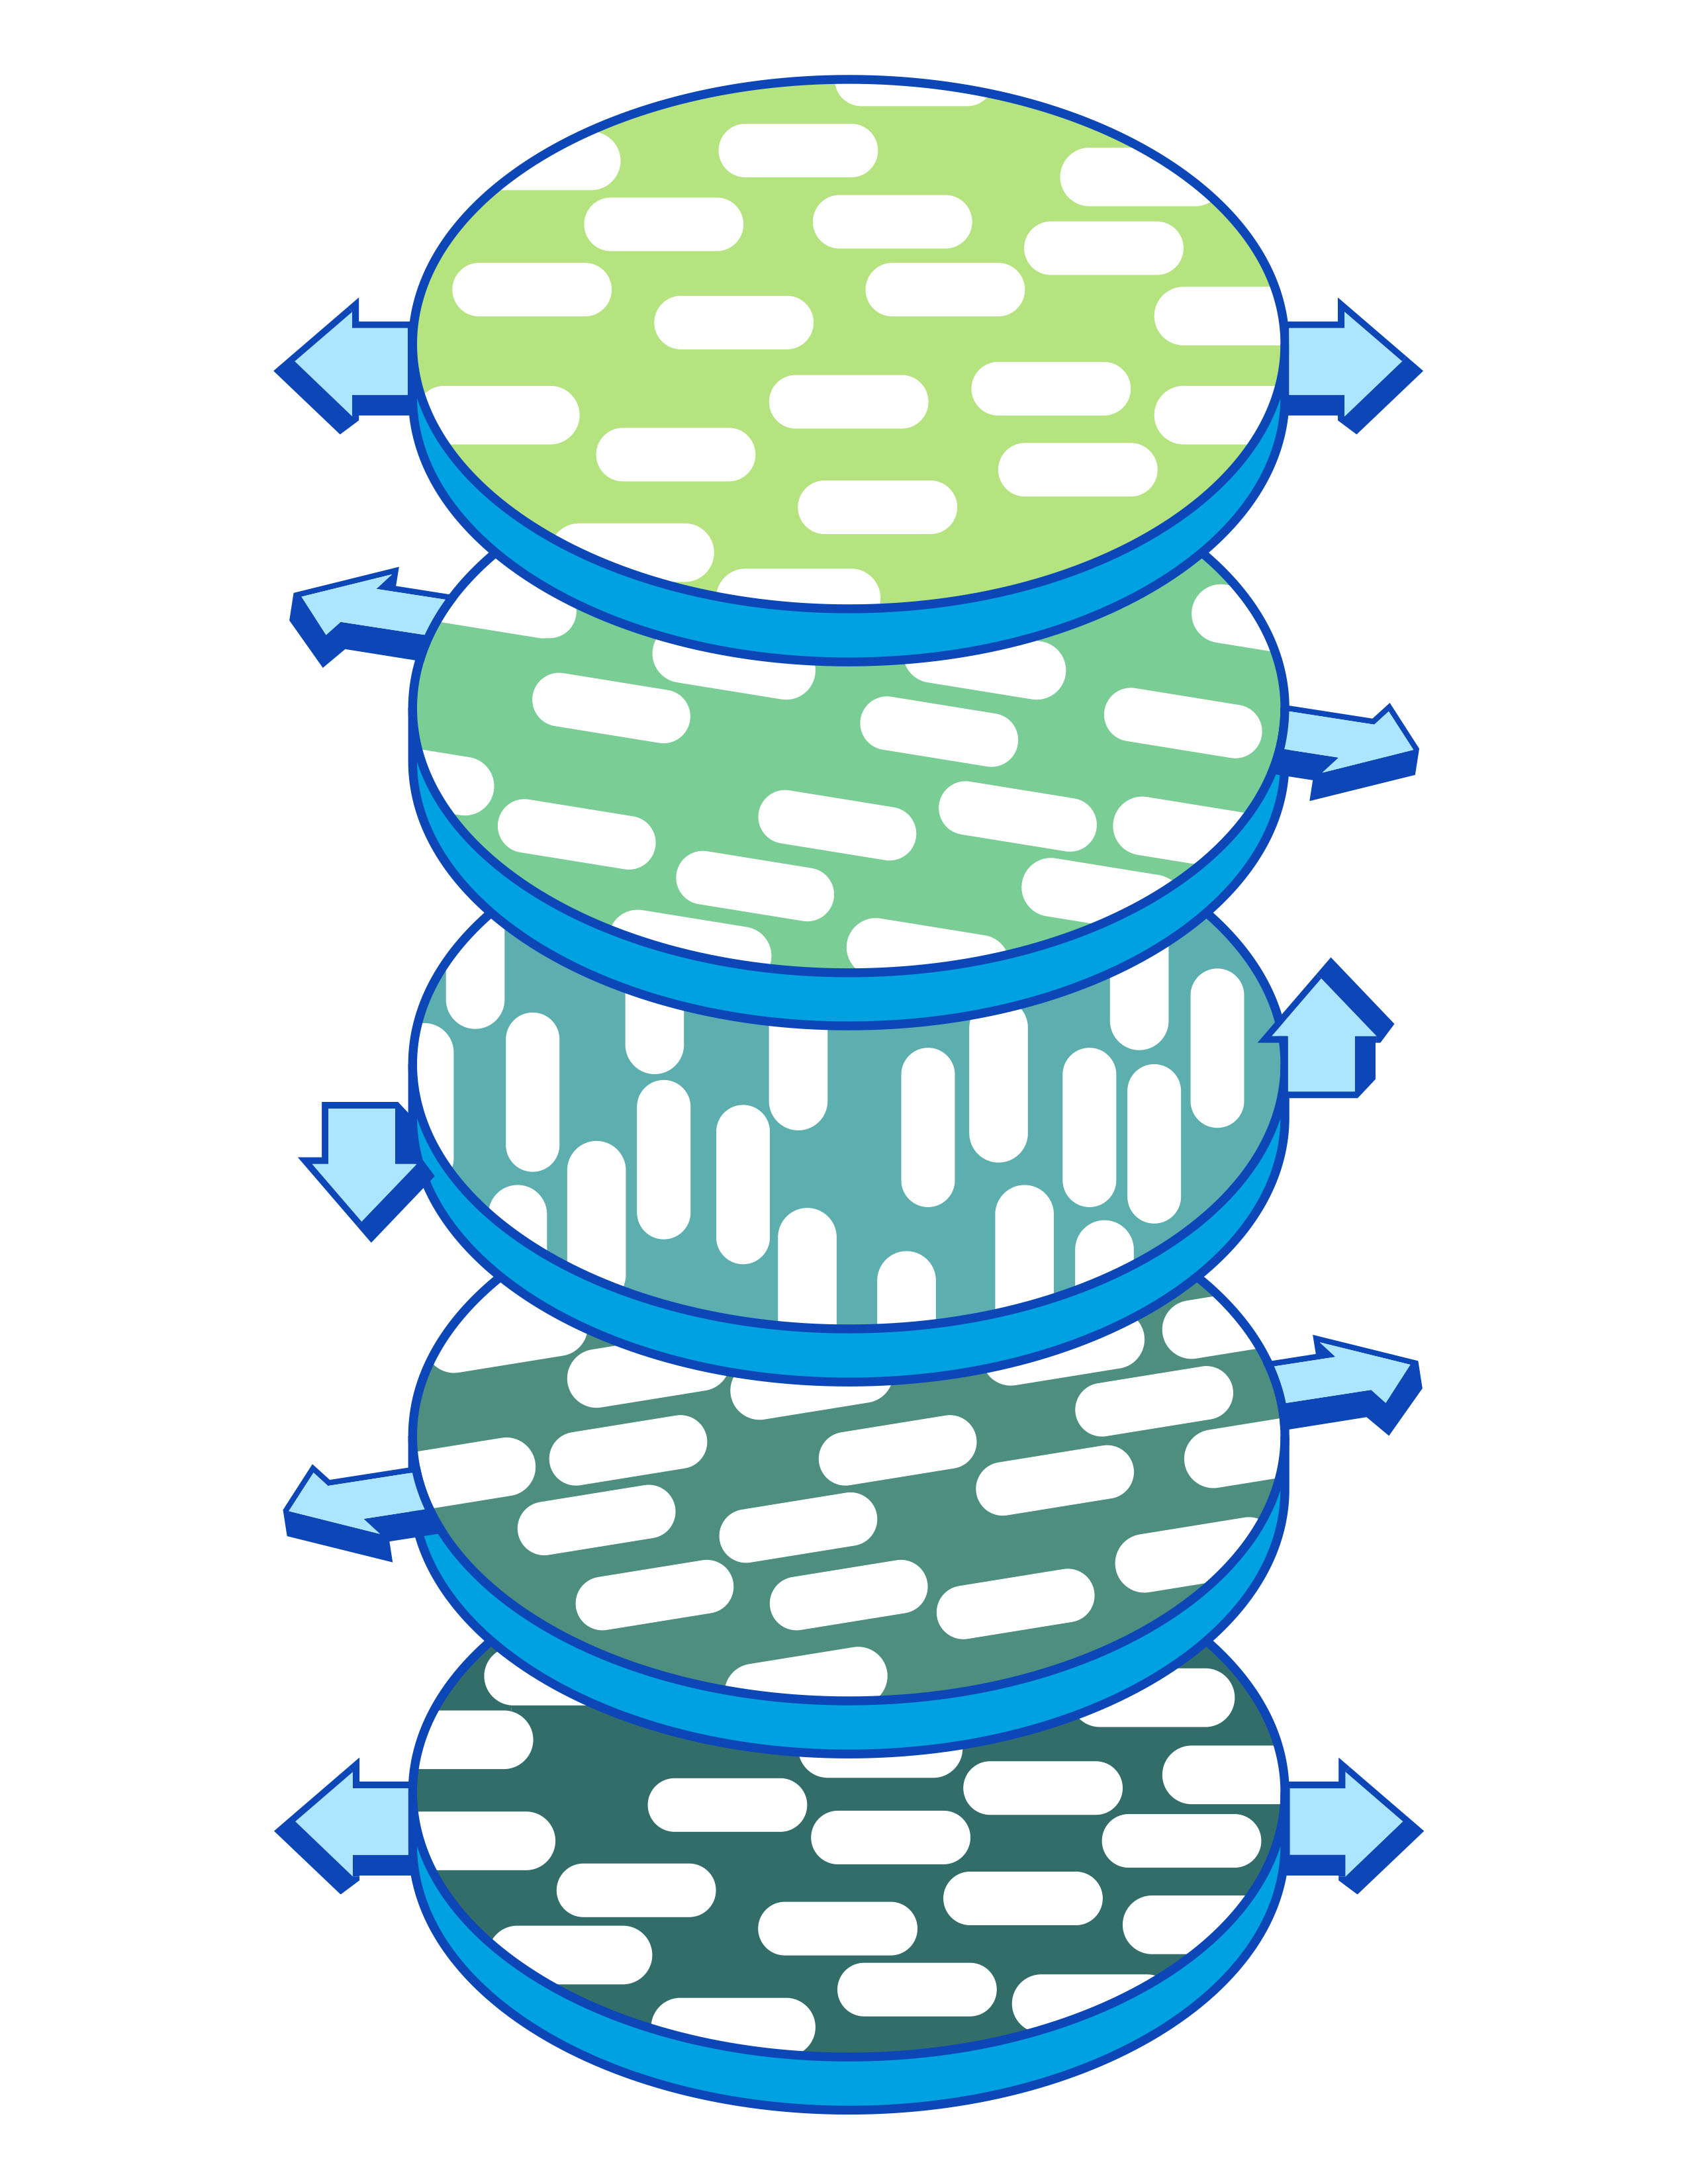 A schematic of cellulose fibers in the cholesteric phase. The fibers in a single layer align in a single direction. Travelling through multiple layers, the axis of orientation of the fibers spins in a circle. 